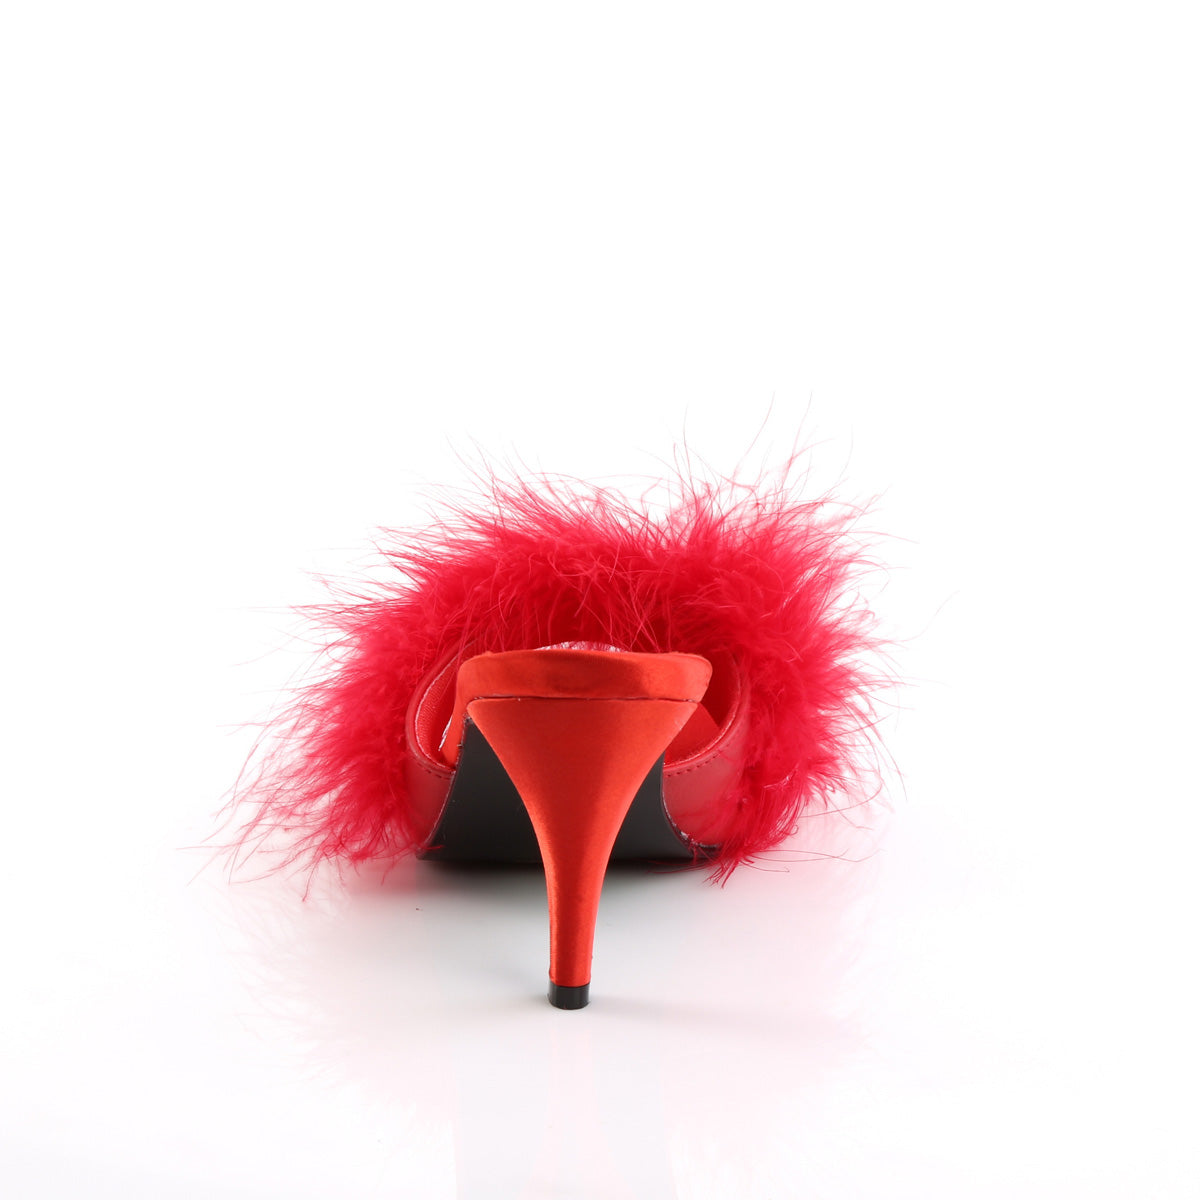 Fabulicious Womens Sandals AMOUR-03 Red Pu-Fur